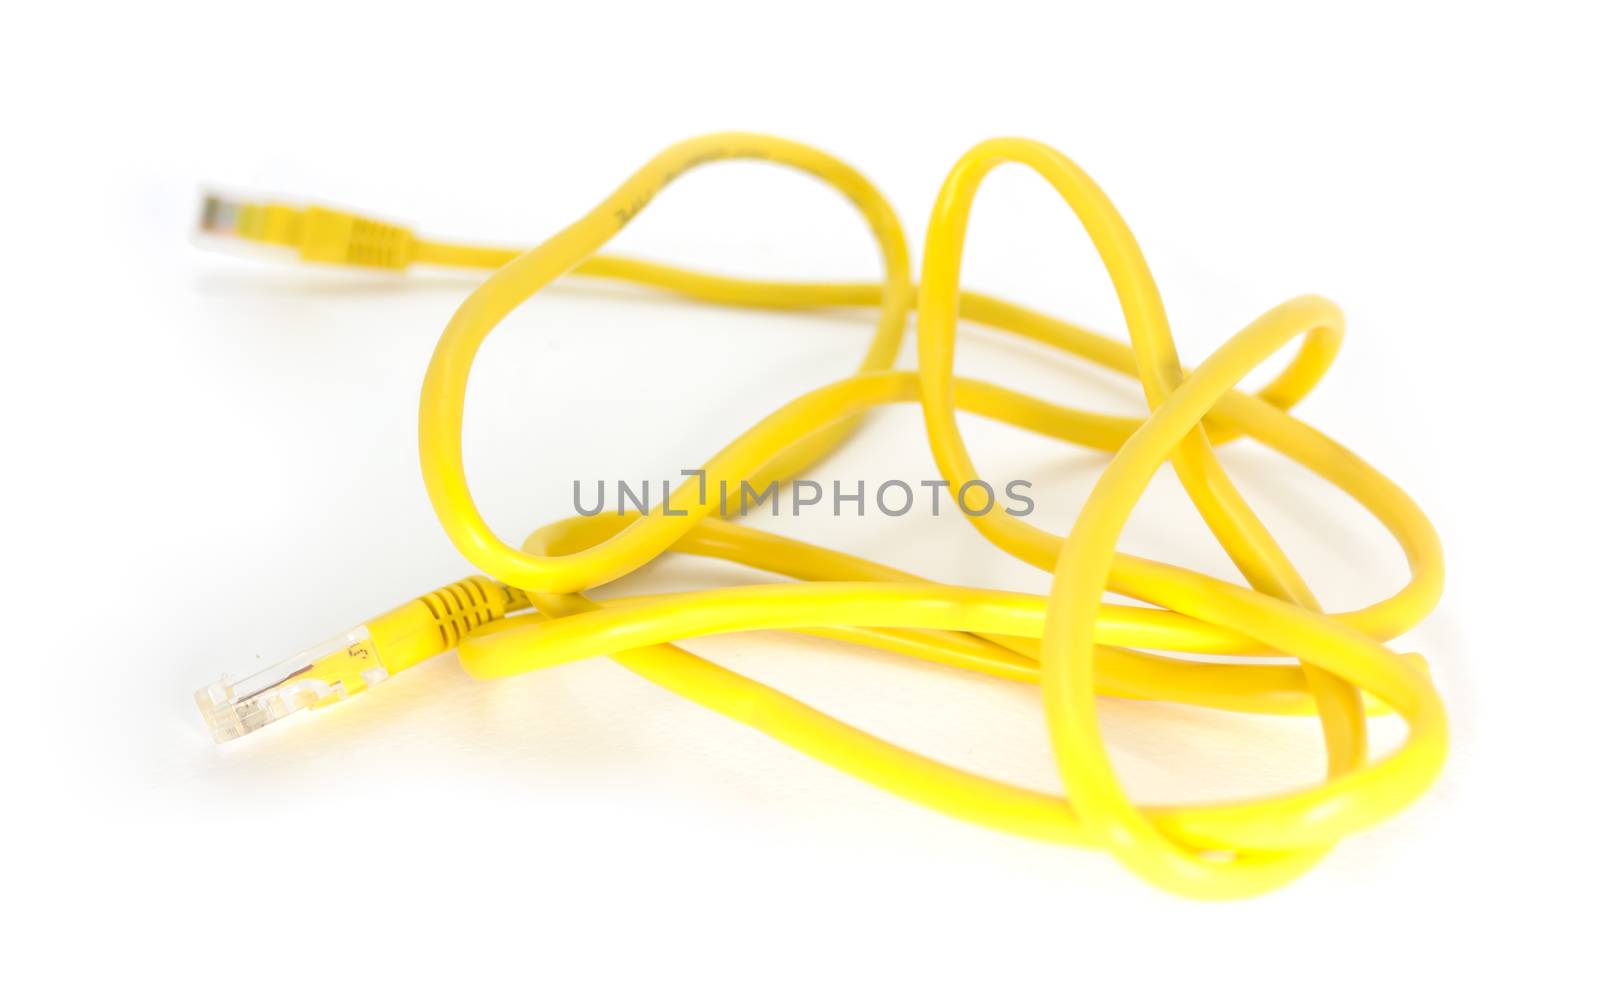 Yellow LAN cable isolated on white background